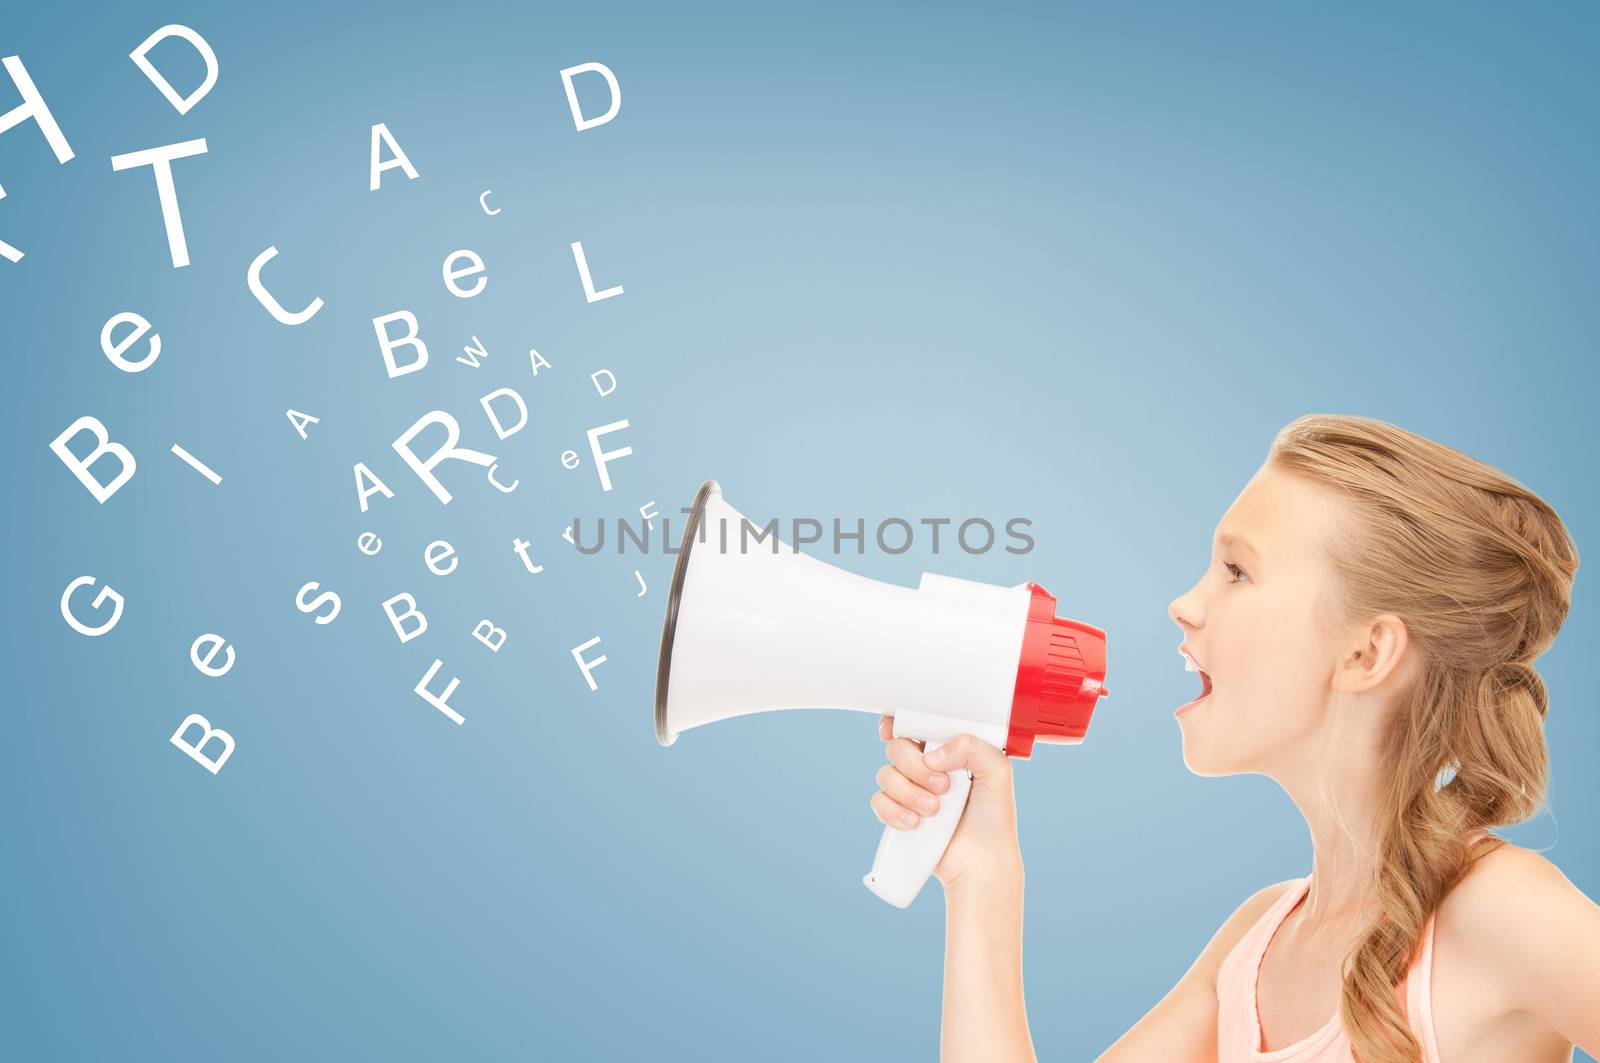 communication concept - girl with megaphone over blue background